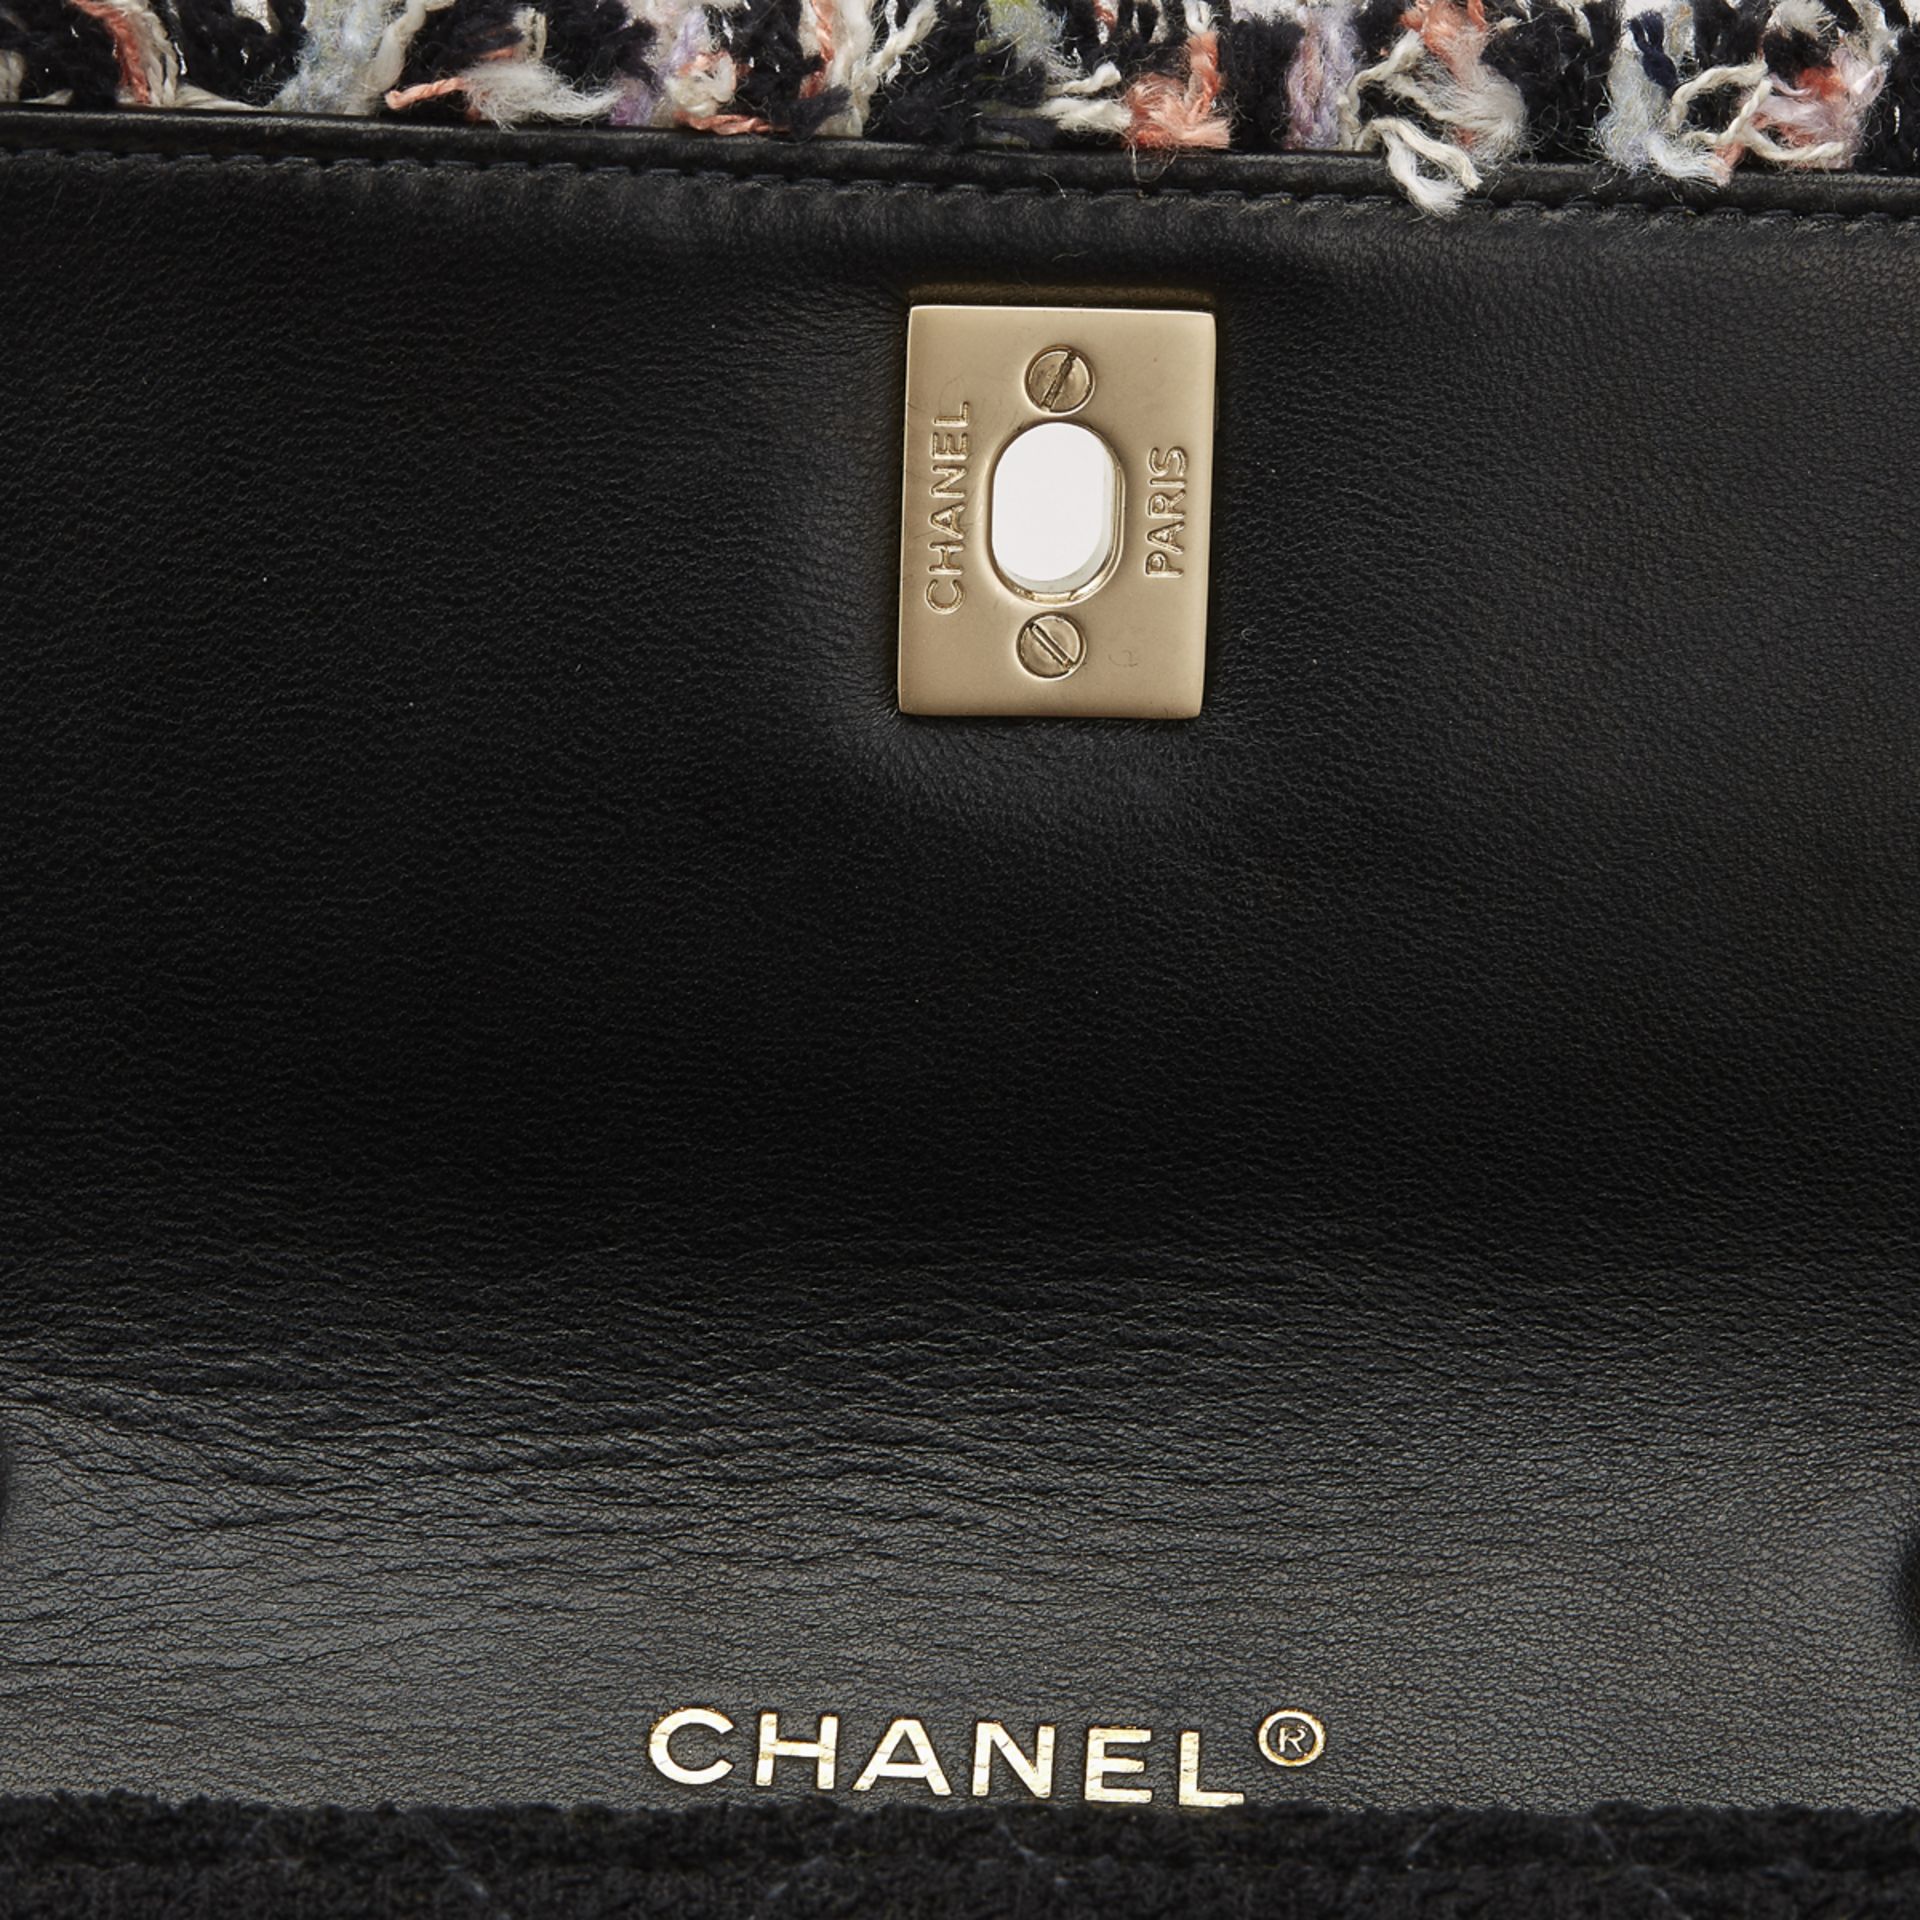 Chanel East West Classic Single Flap Bag - Image 7 of 10